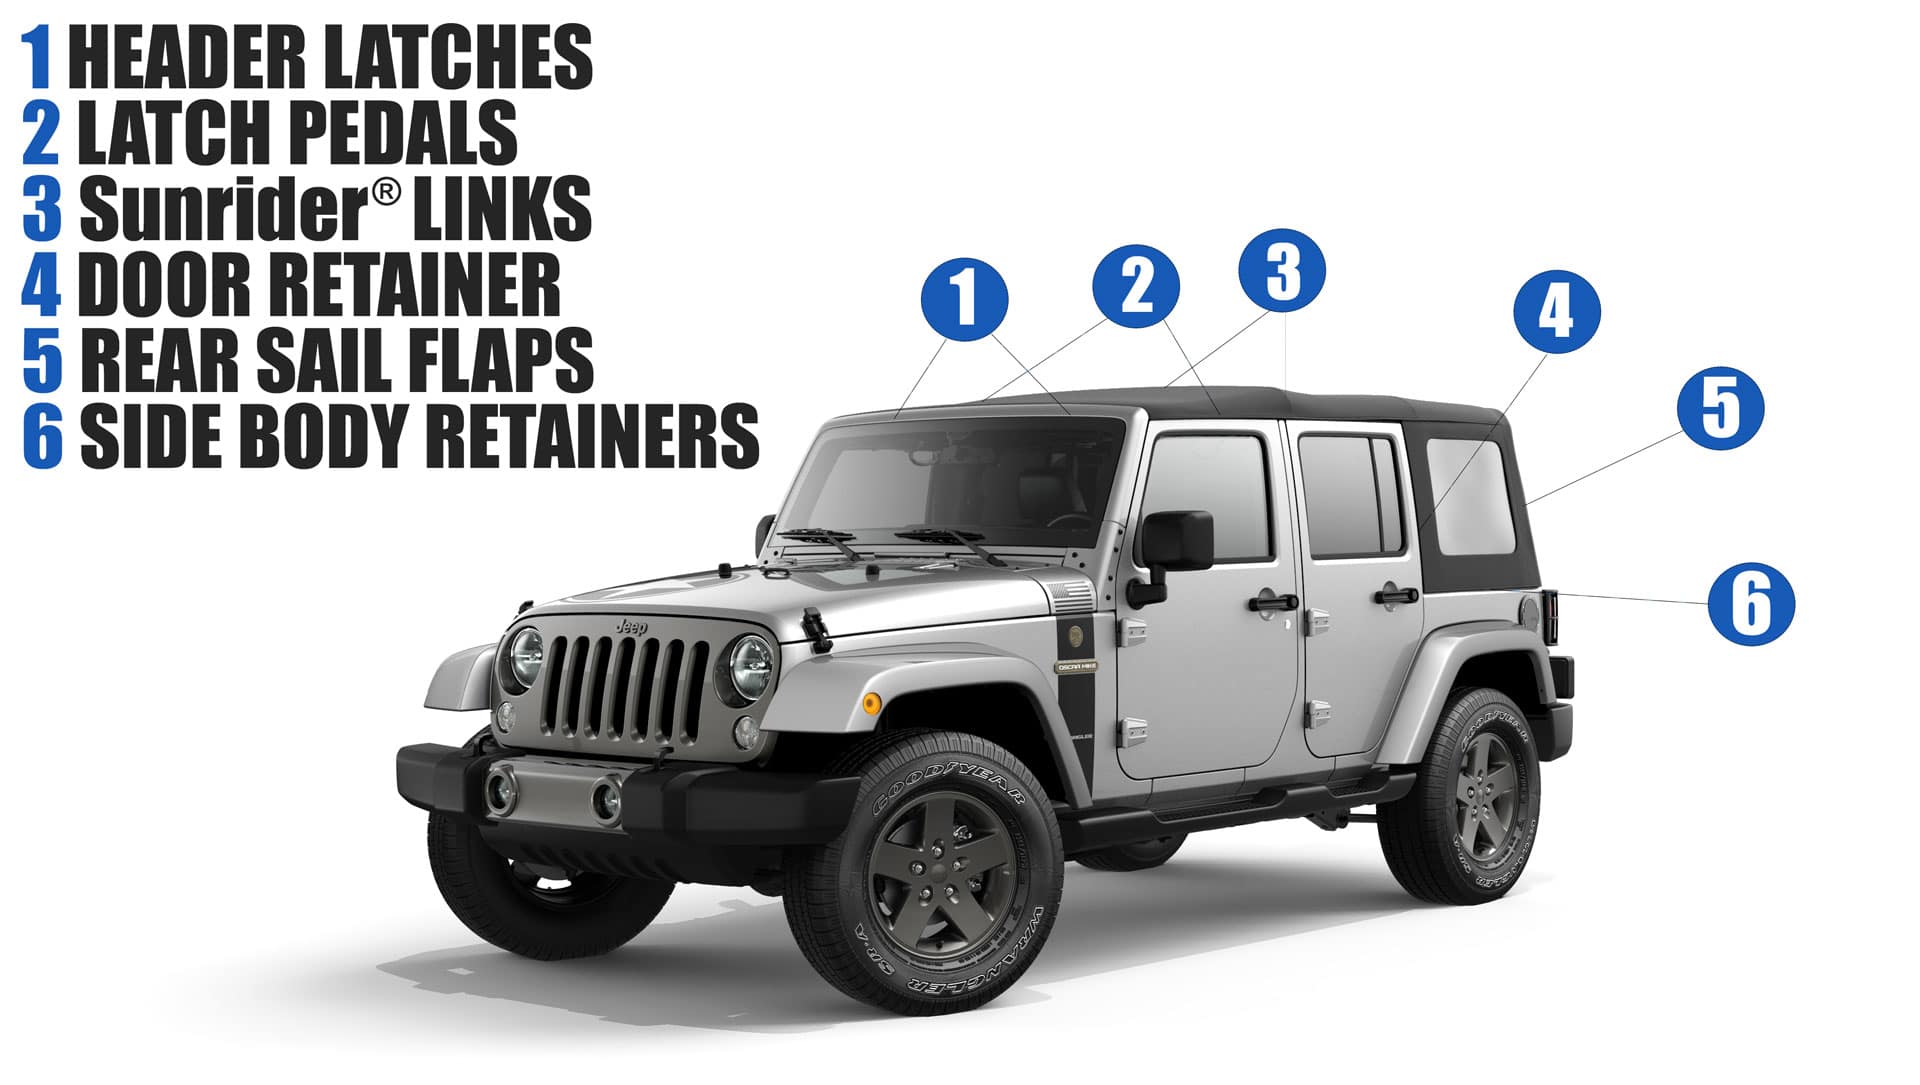 Remove The Soft Top of Your Wrangler | faqs | Safford of Springfield